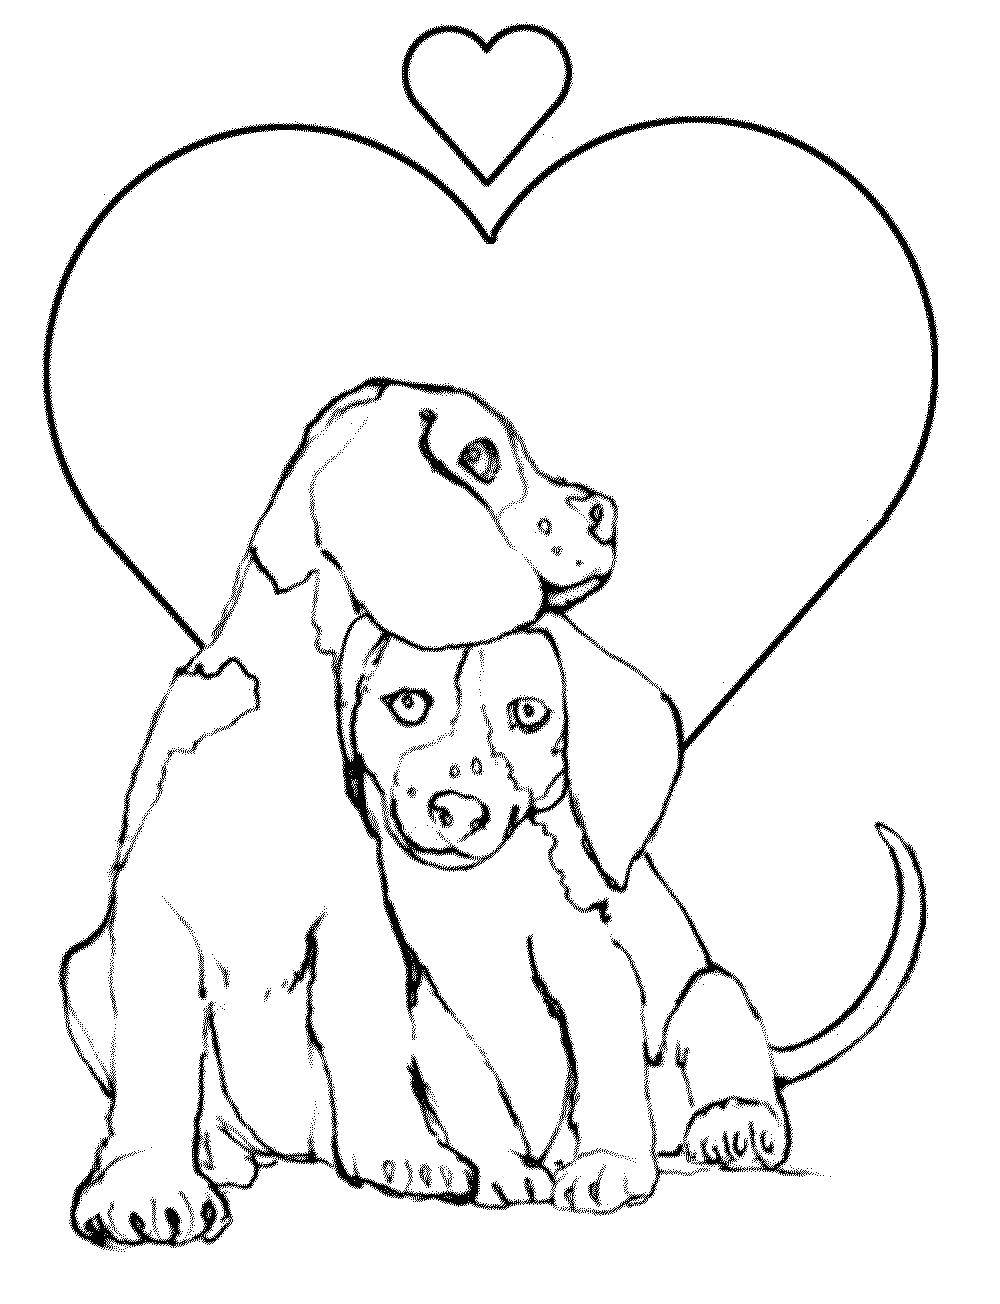 Coloring Love dogs. Category Pets allowed. Tags:  animals, dogs, love dogs.